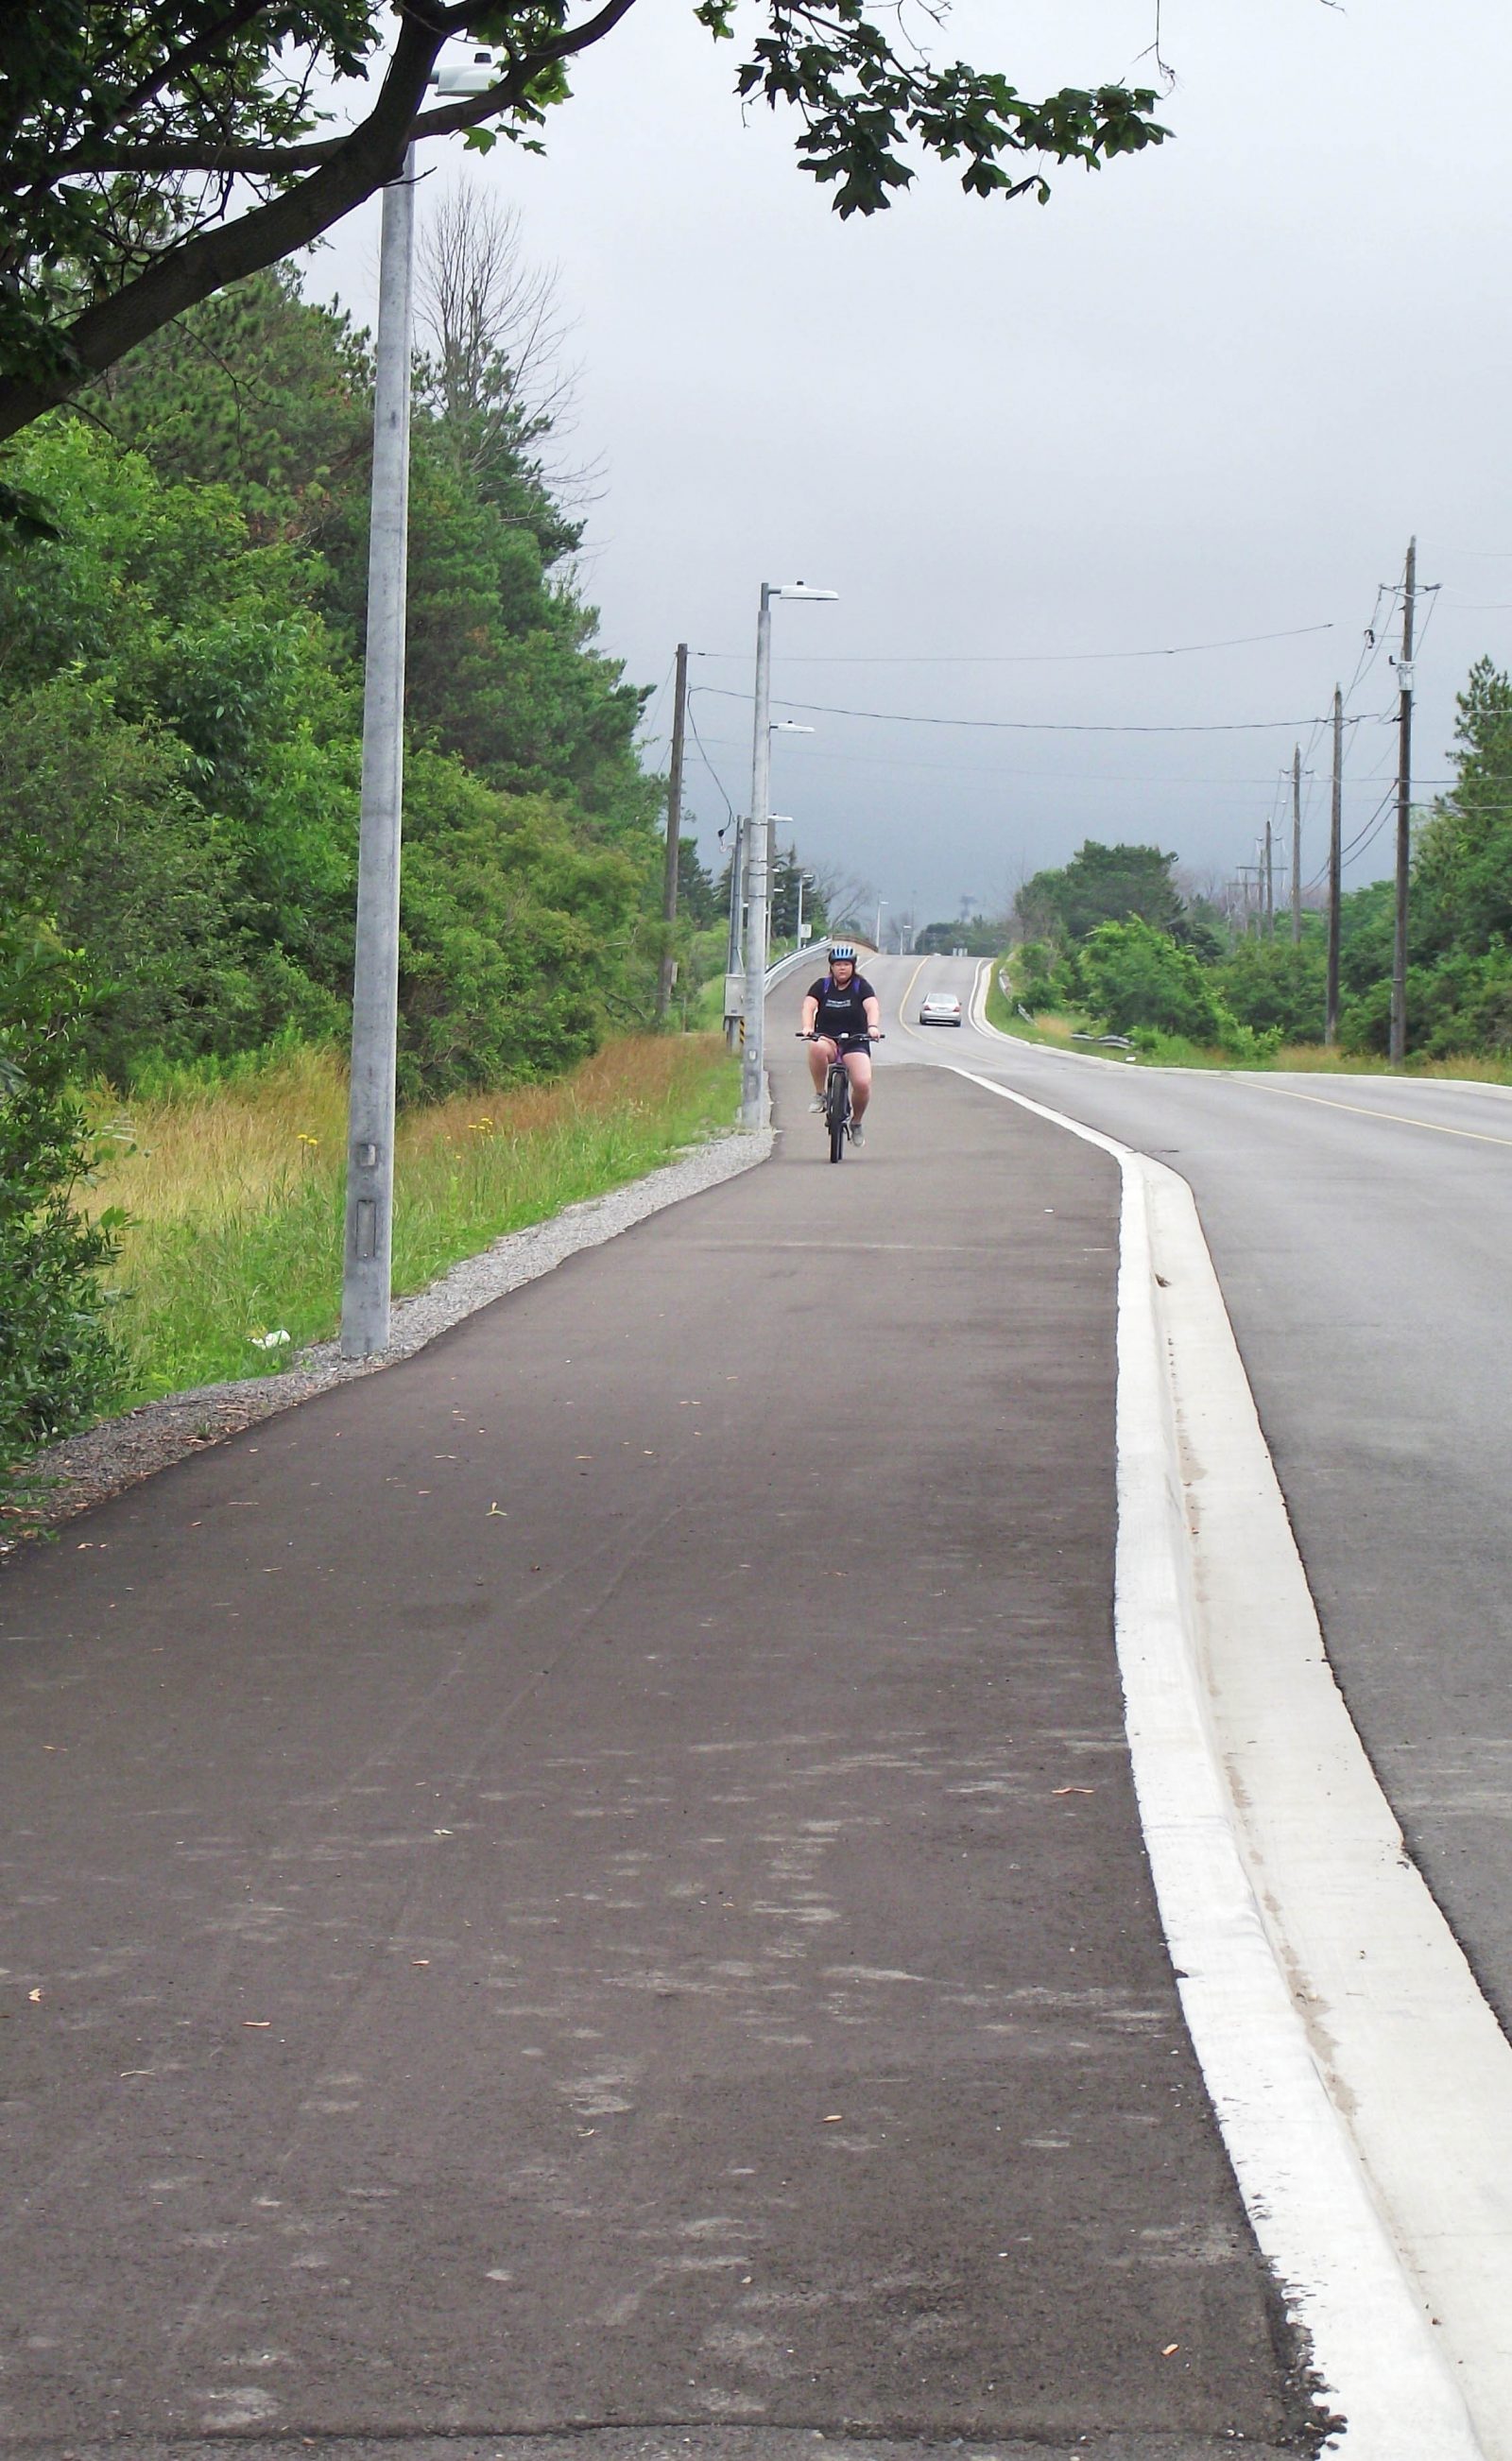 Decew and Merrittville pathway